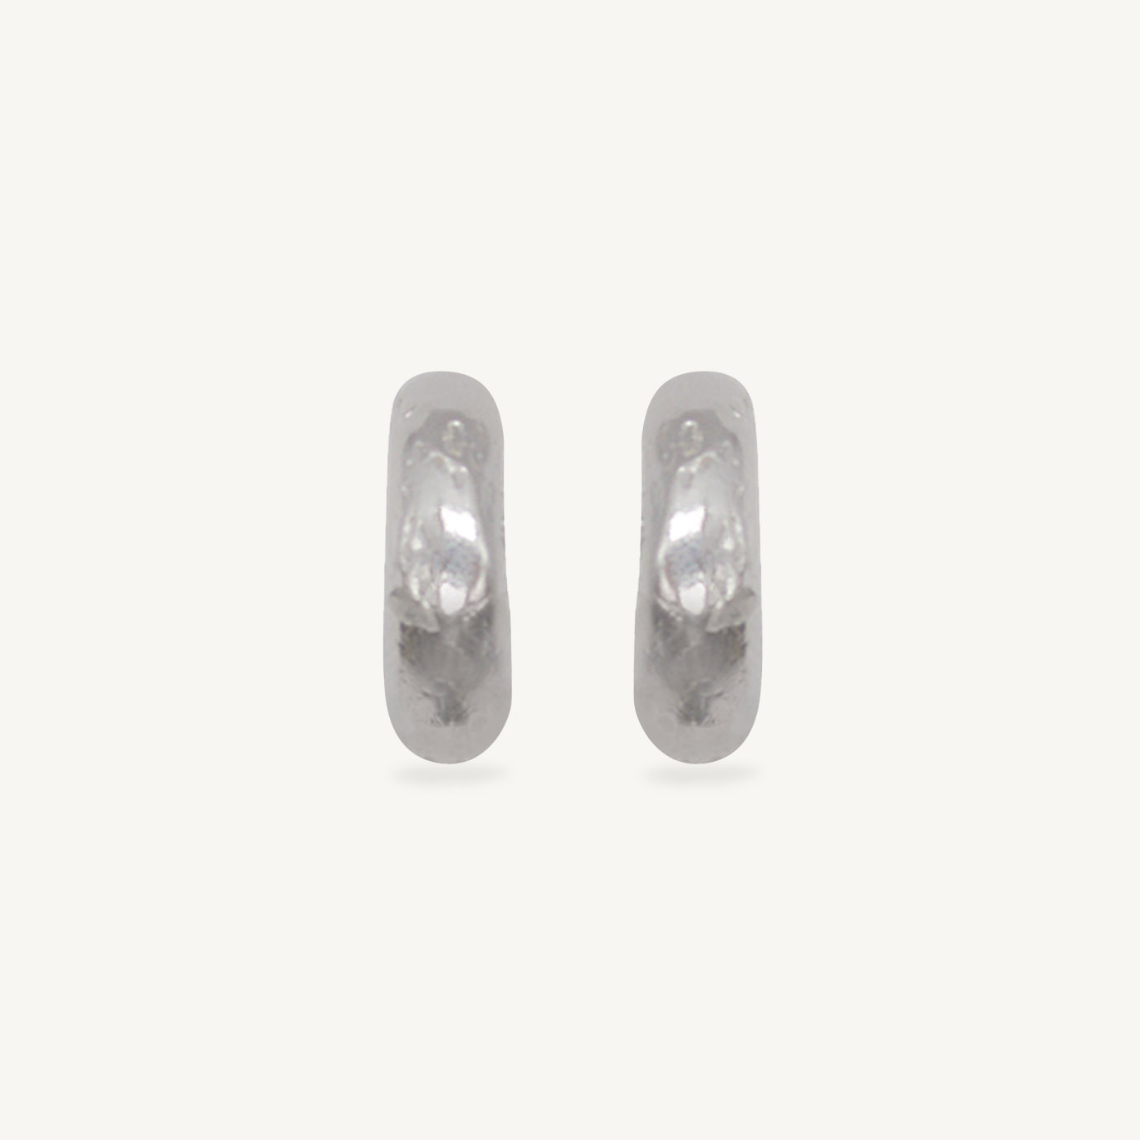 These chunky recycled silver statement hoop earrings with an organic texture are ethically handmade in London by Folde Jewellery.